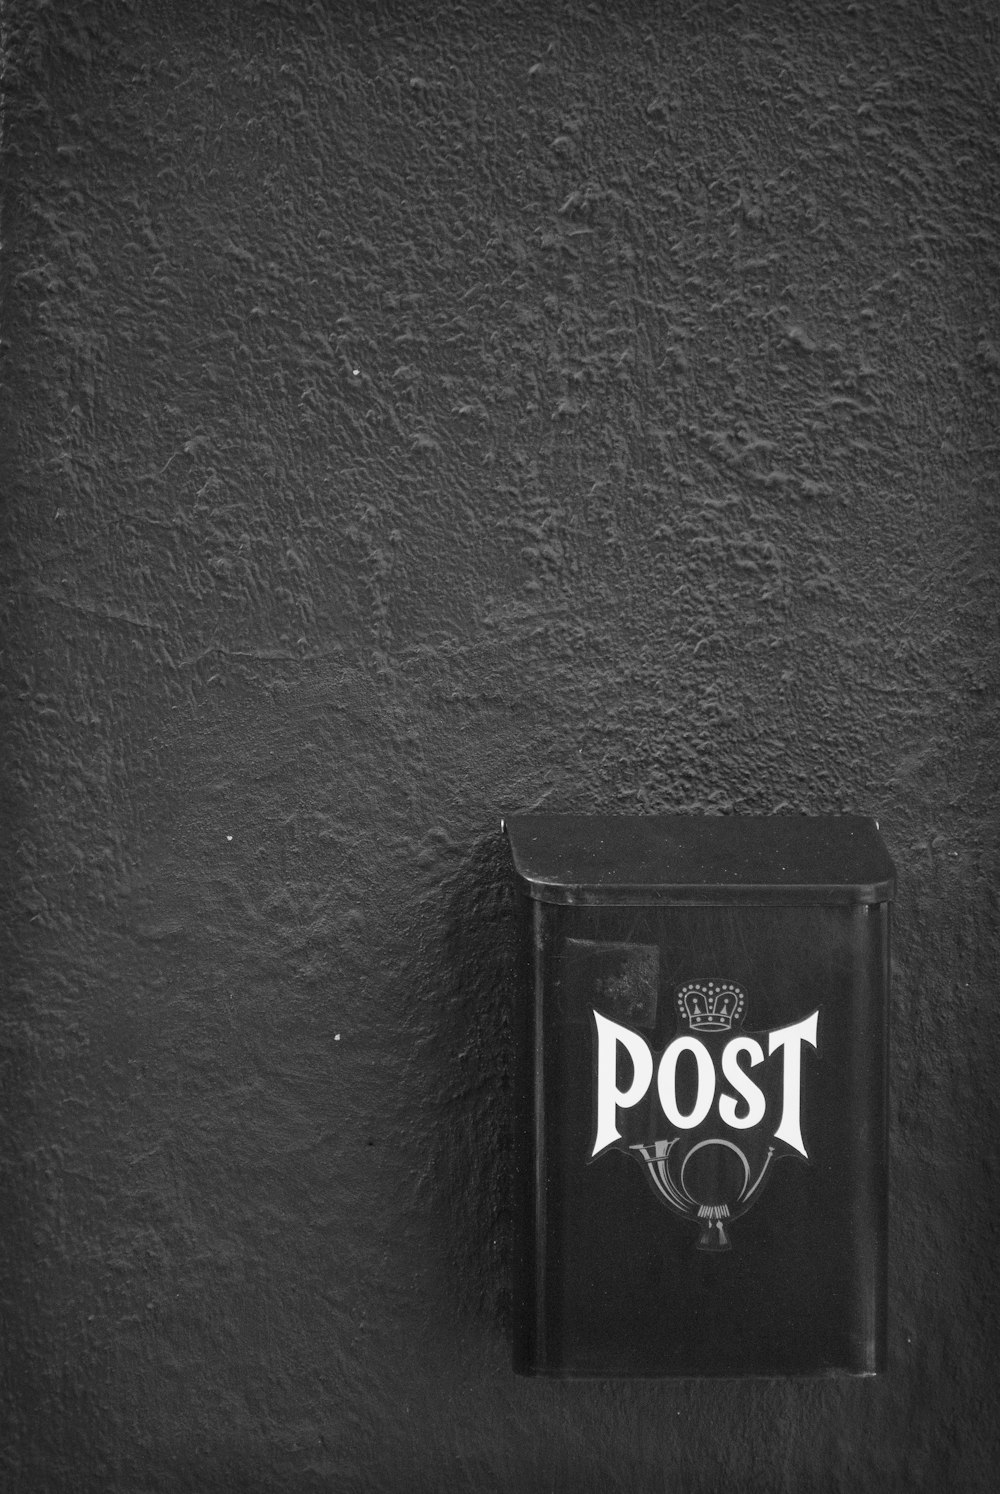 a black and white photo of a post box